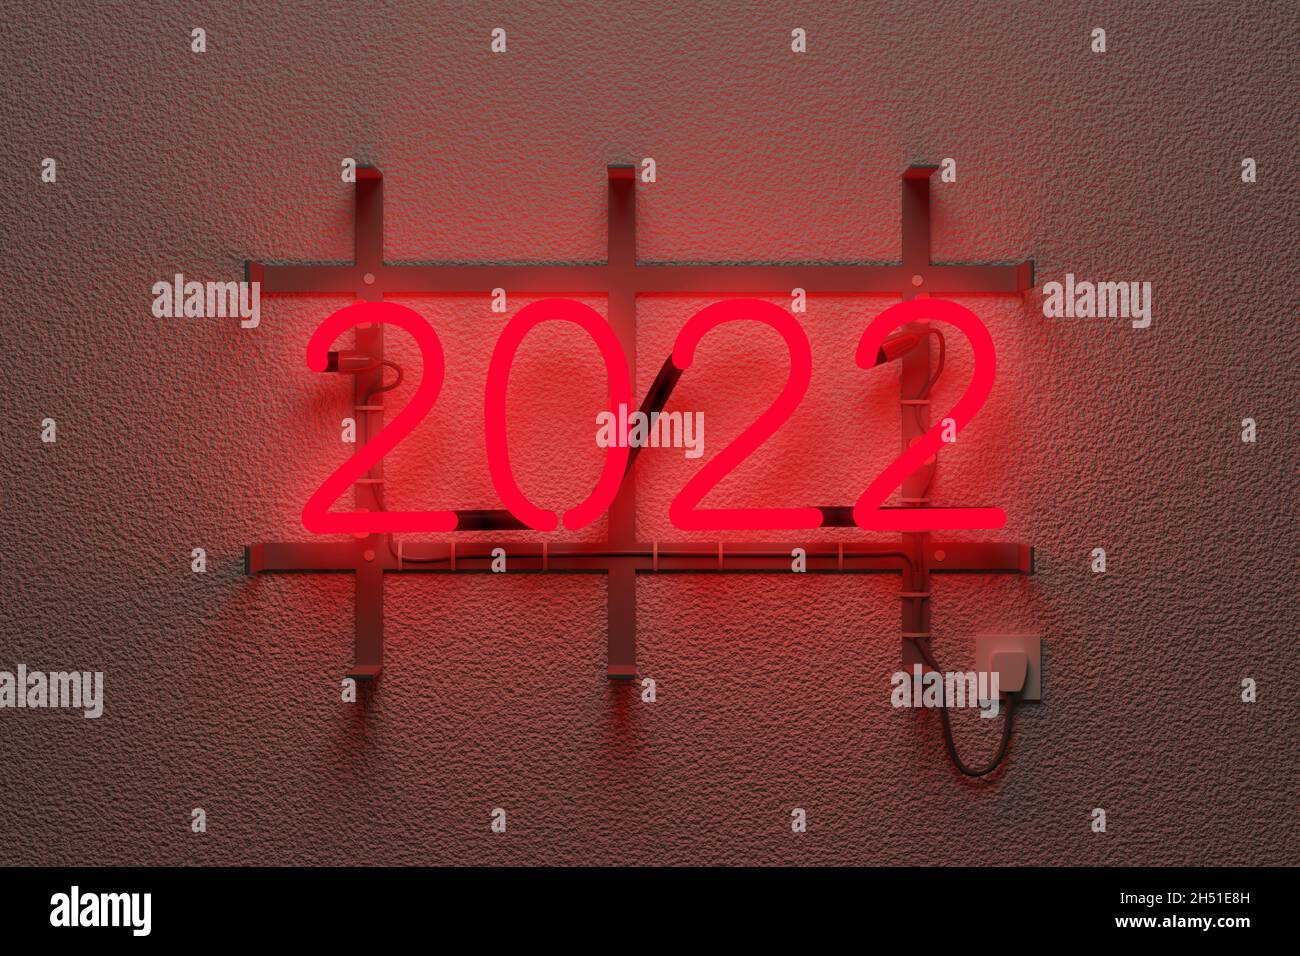 Realistic neon sign with the legend 2022. New year concept. 3d illustration. Stock Photo